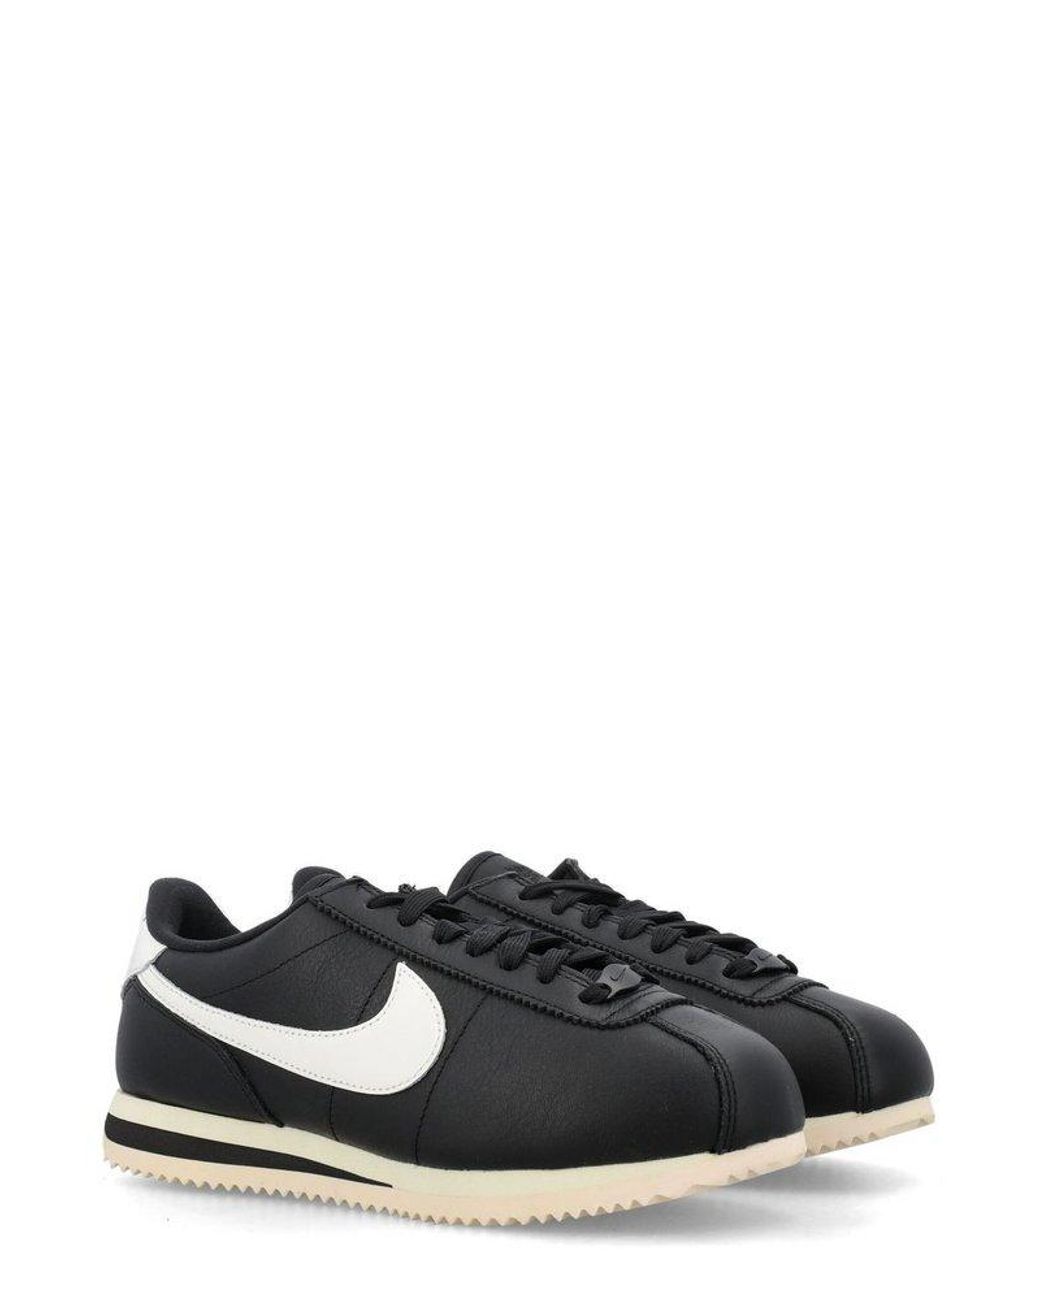 Nike Cortez 23 Premium Lace-up Sneakers in Black | Lyst